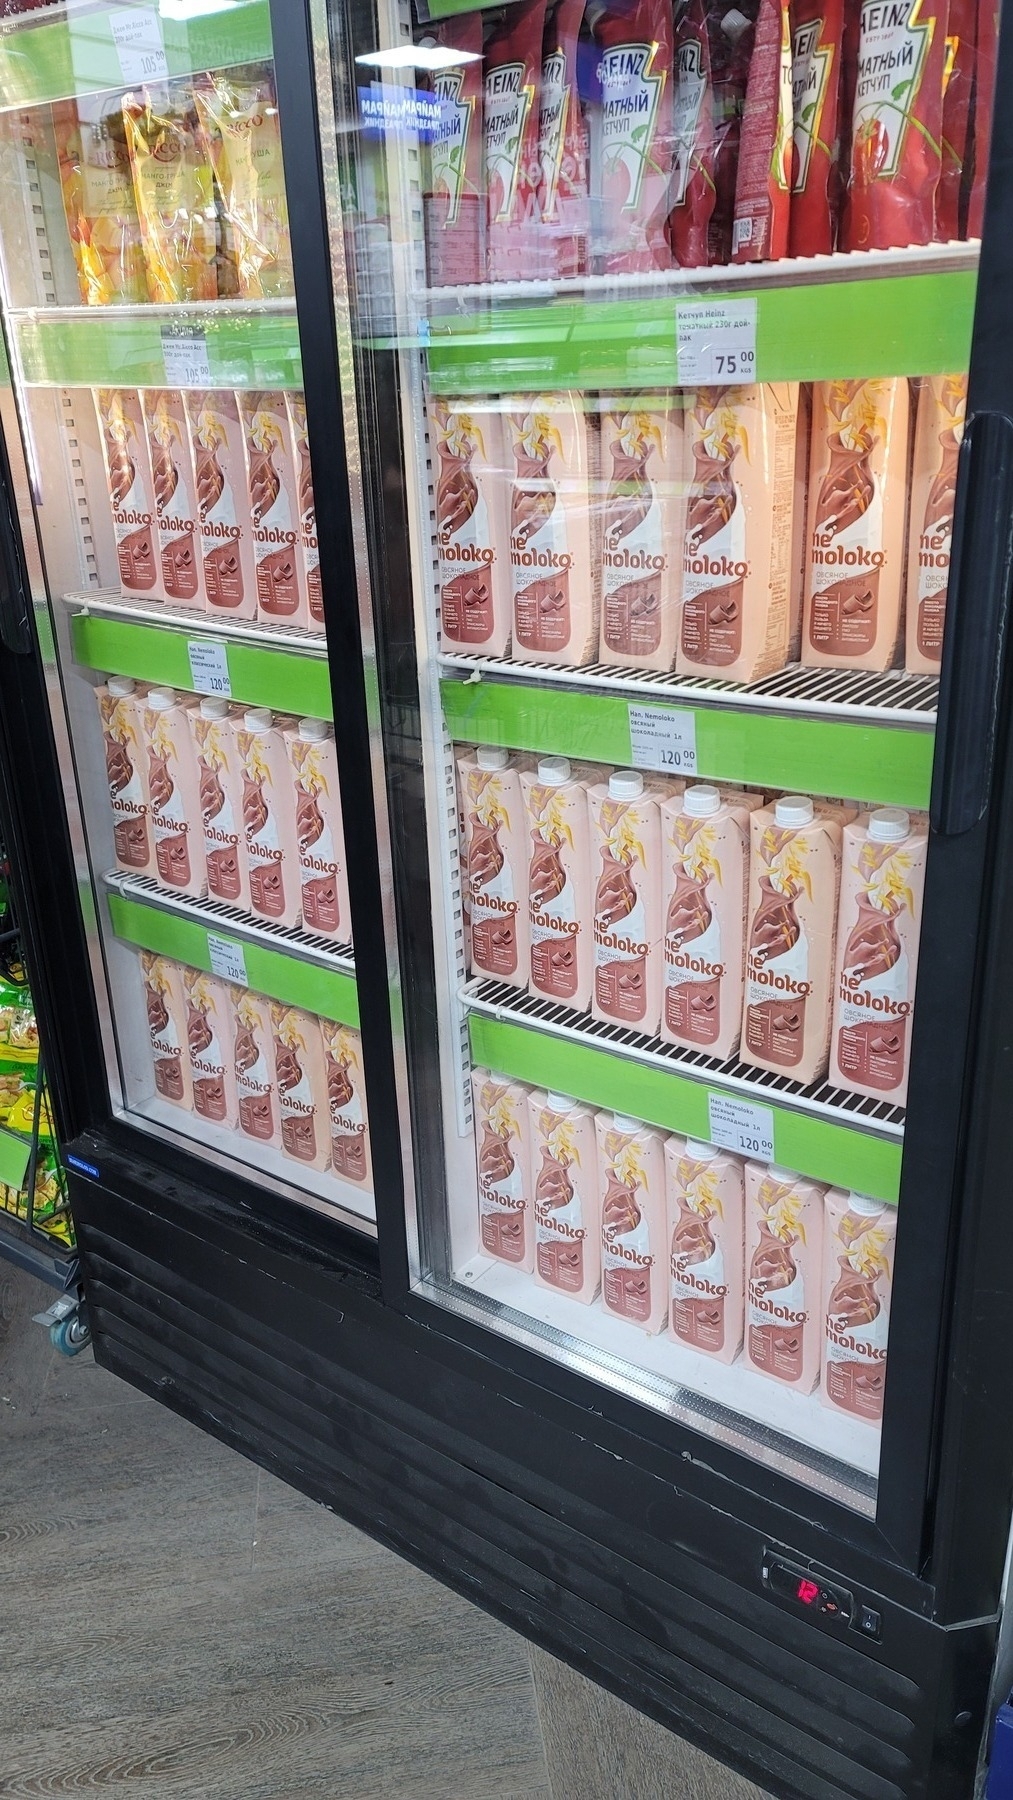 sliding door fridge with 3 shelves (out of 4 in the picture) filled with nemoloko dairy-free chocolate milk